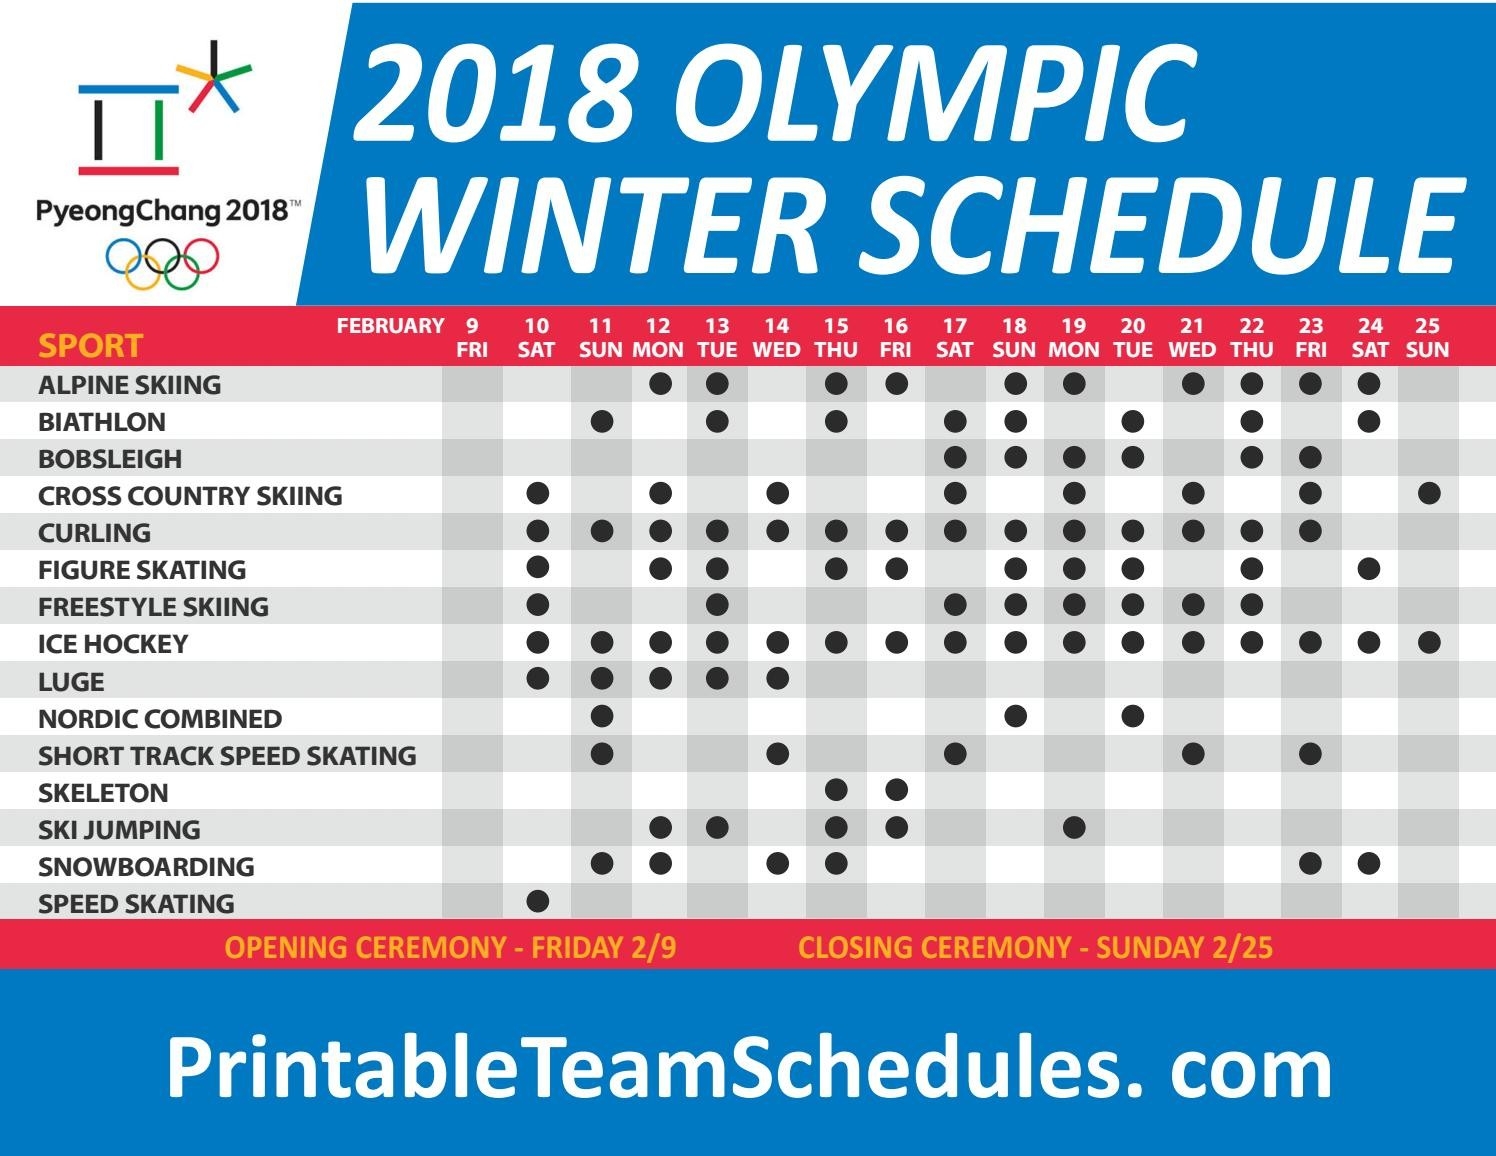 2018 Pyeongchang Winter Olympics Schedule By Printteamschedules - Issuu-Make Shift Calander Oct 25 November 21